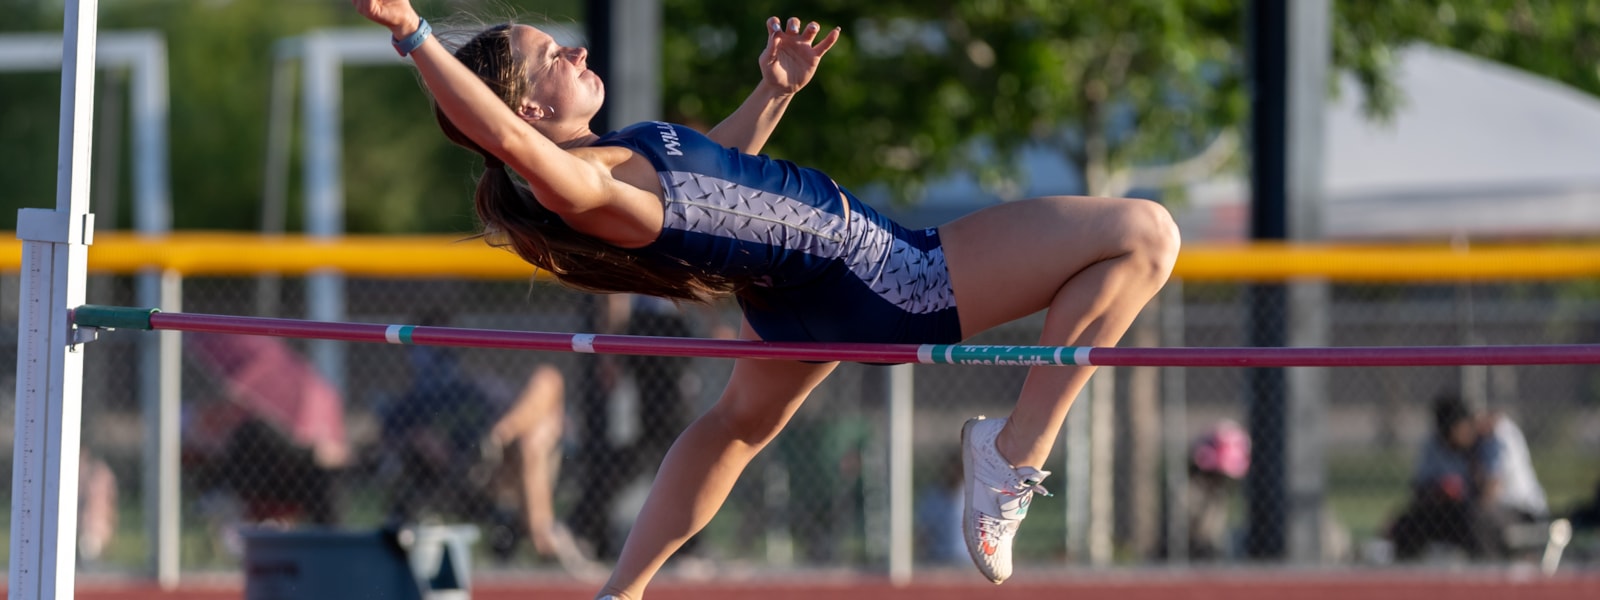 Girl performing athletic high jump for track and field event.